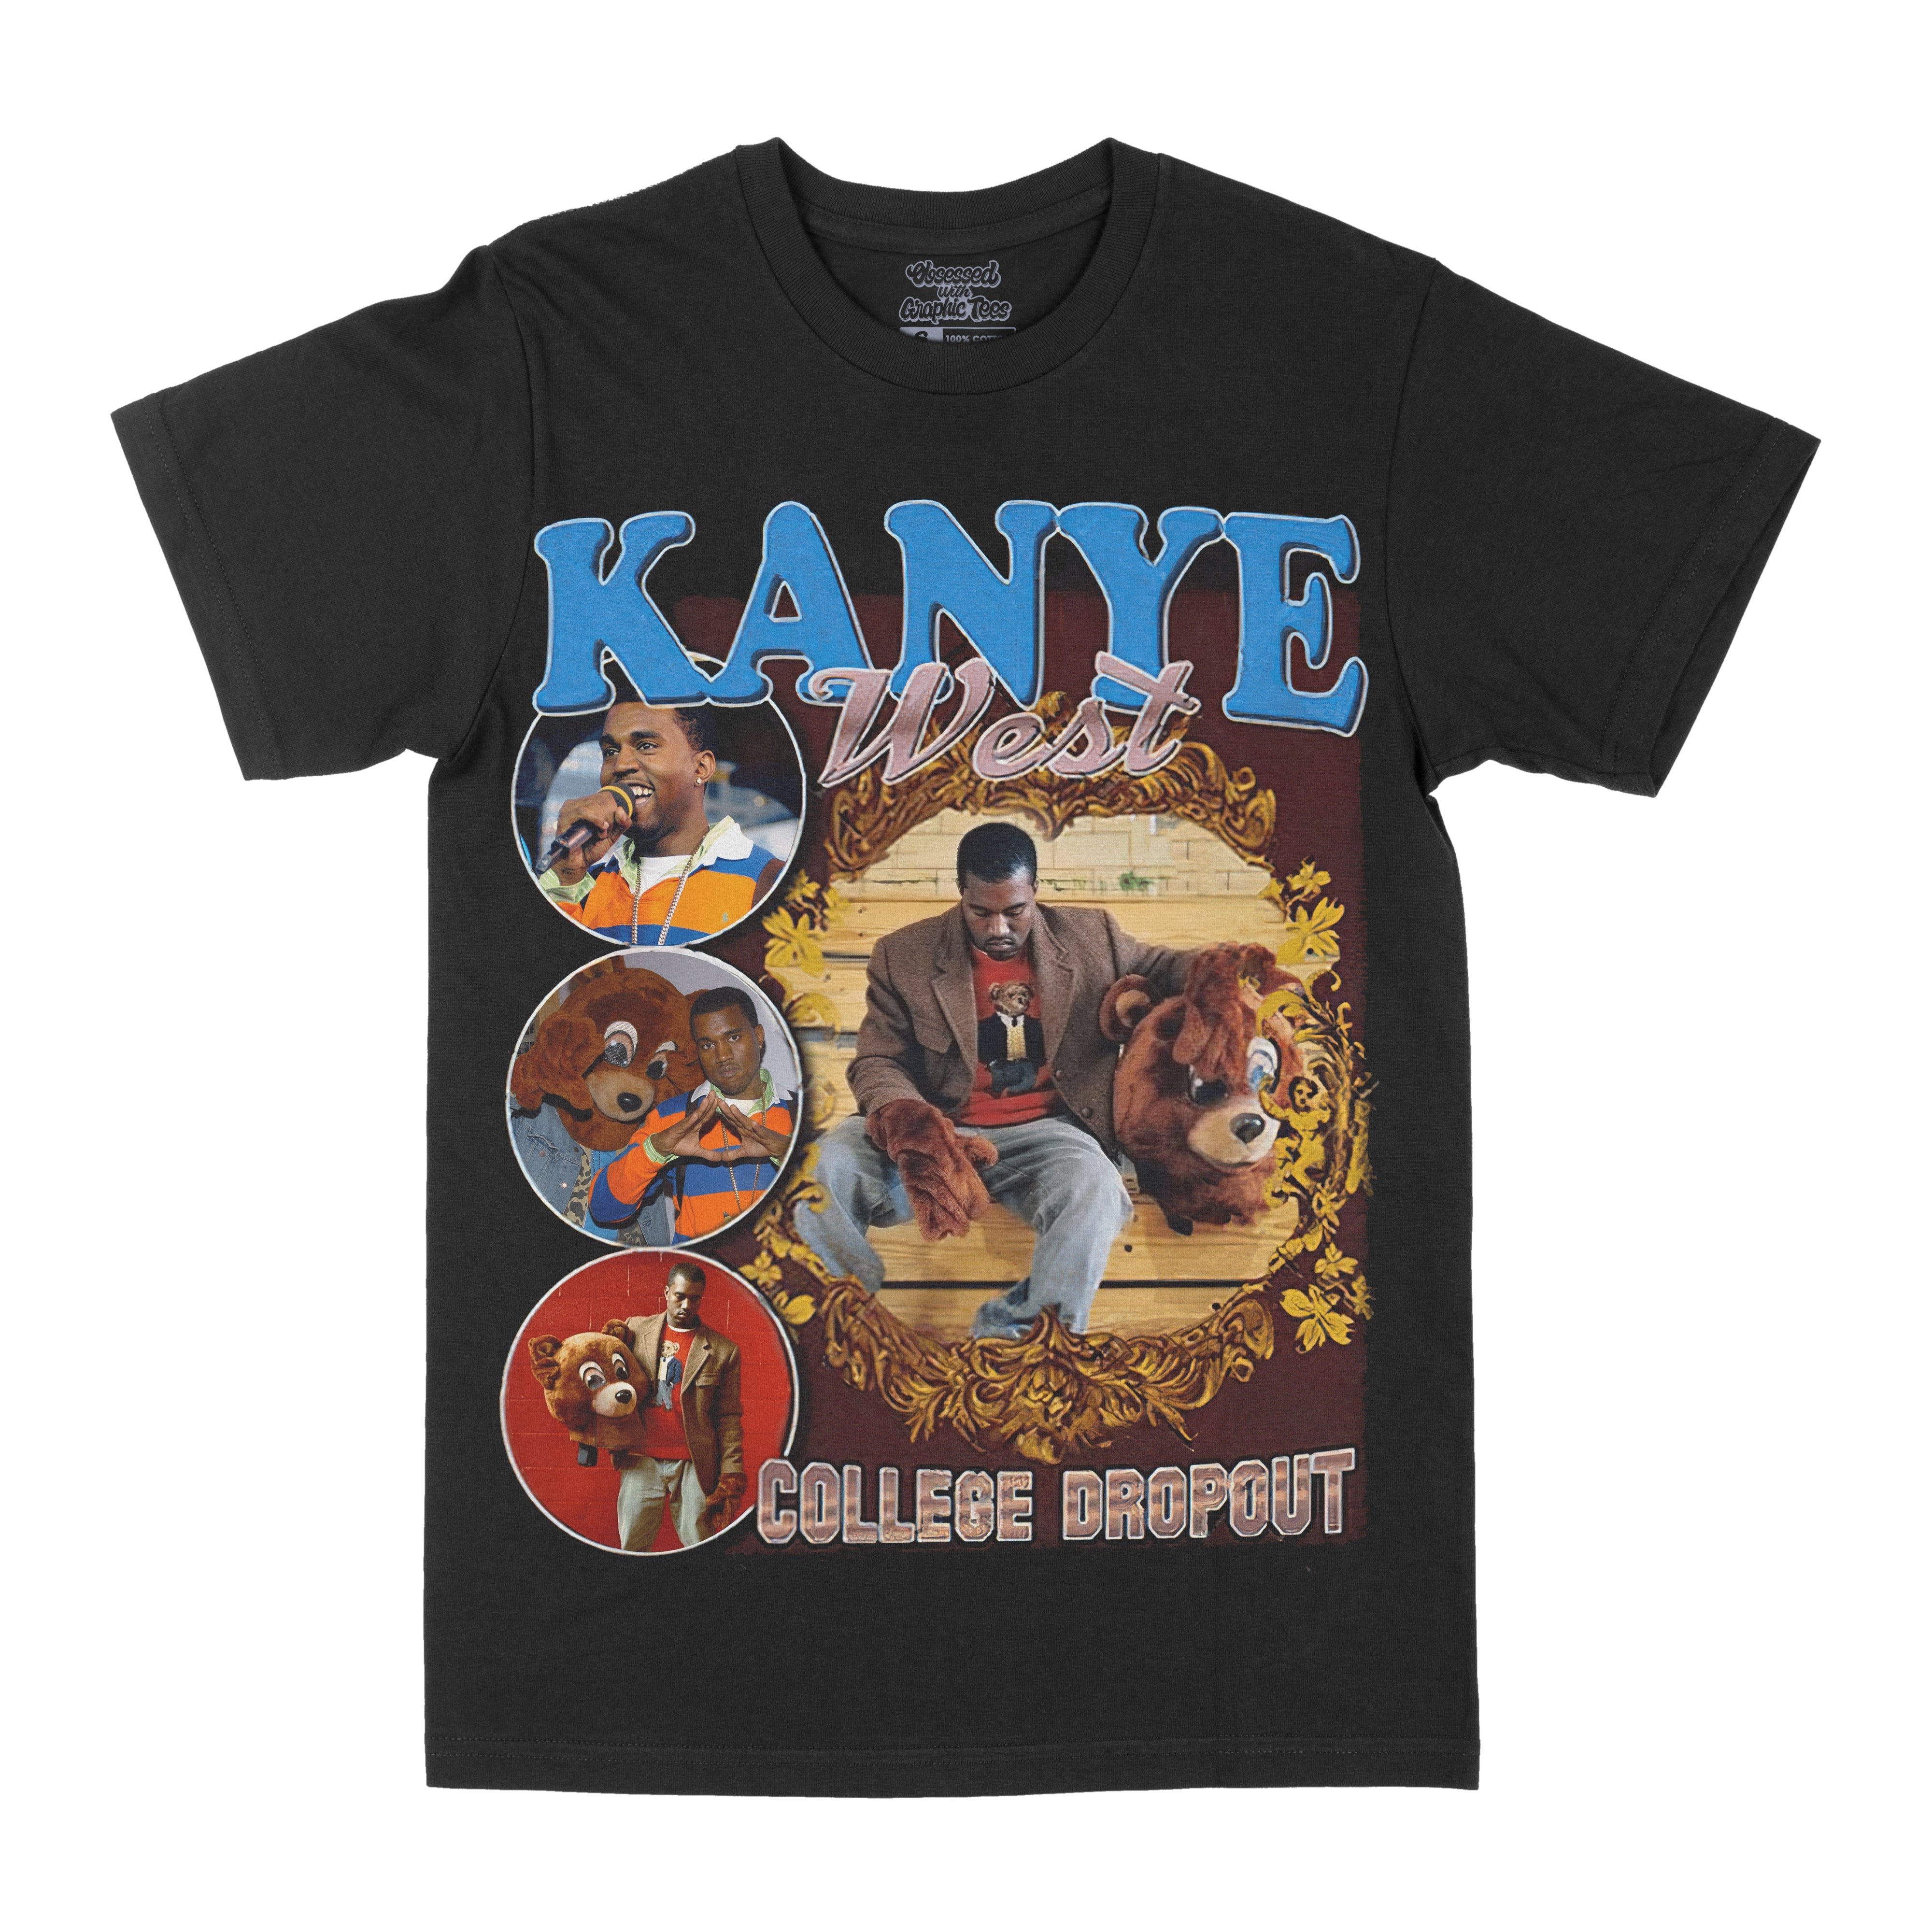 Kanye West The College II Dropout Graphic Tee